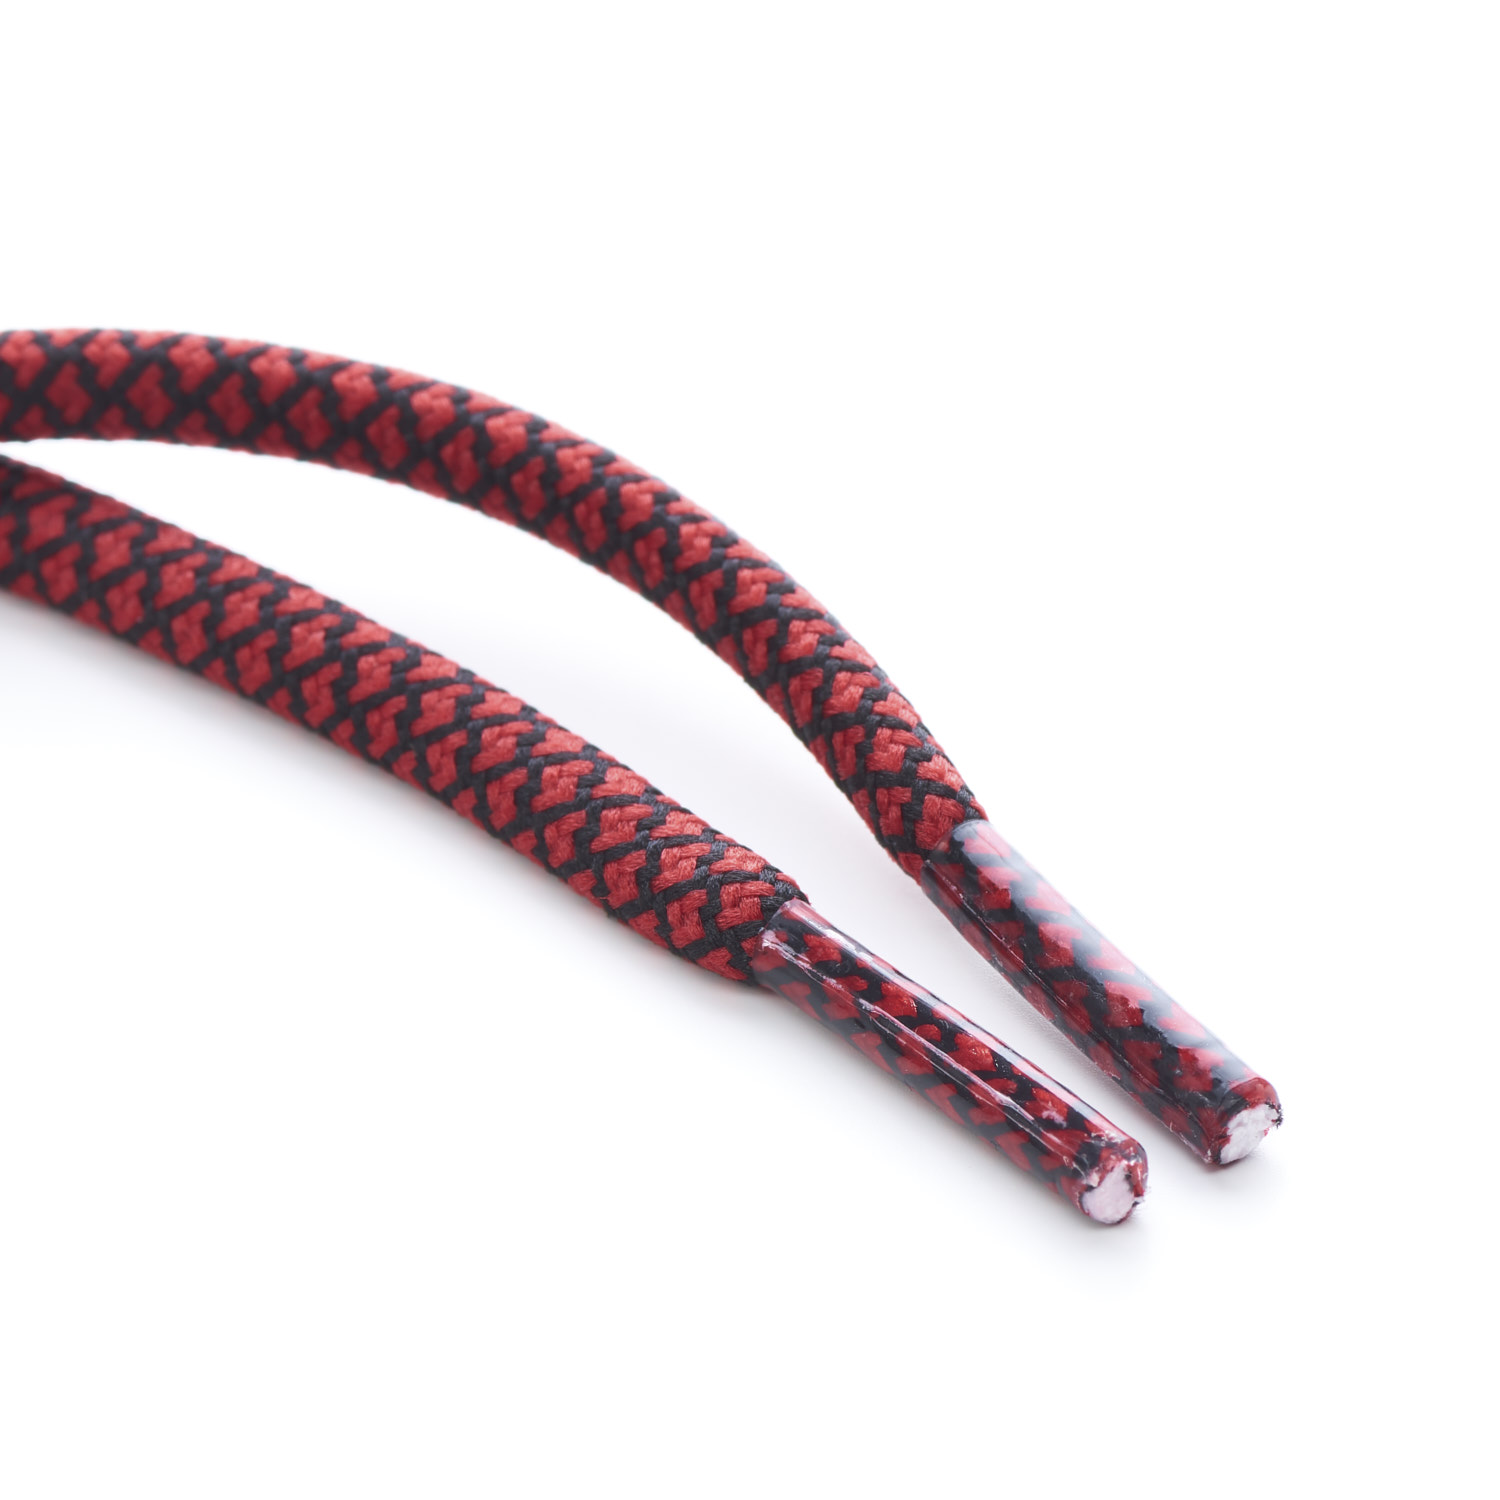 5mm Round Cord Honeycomb Shoe Laces Red & Black